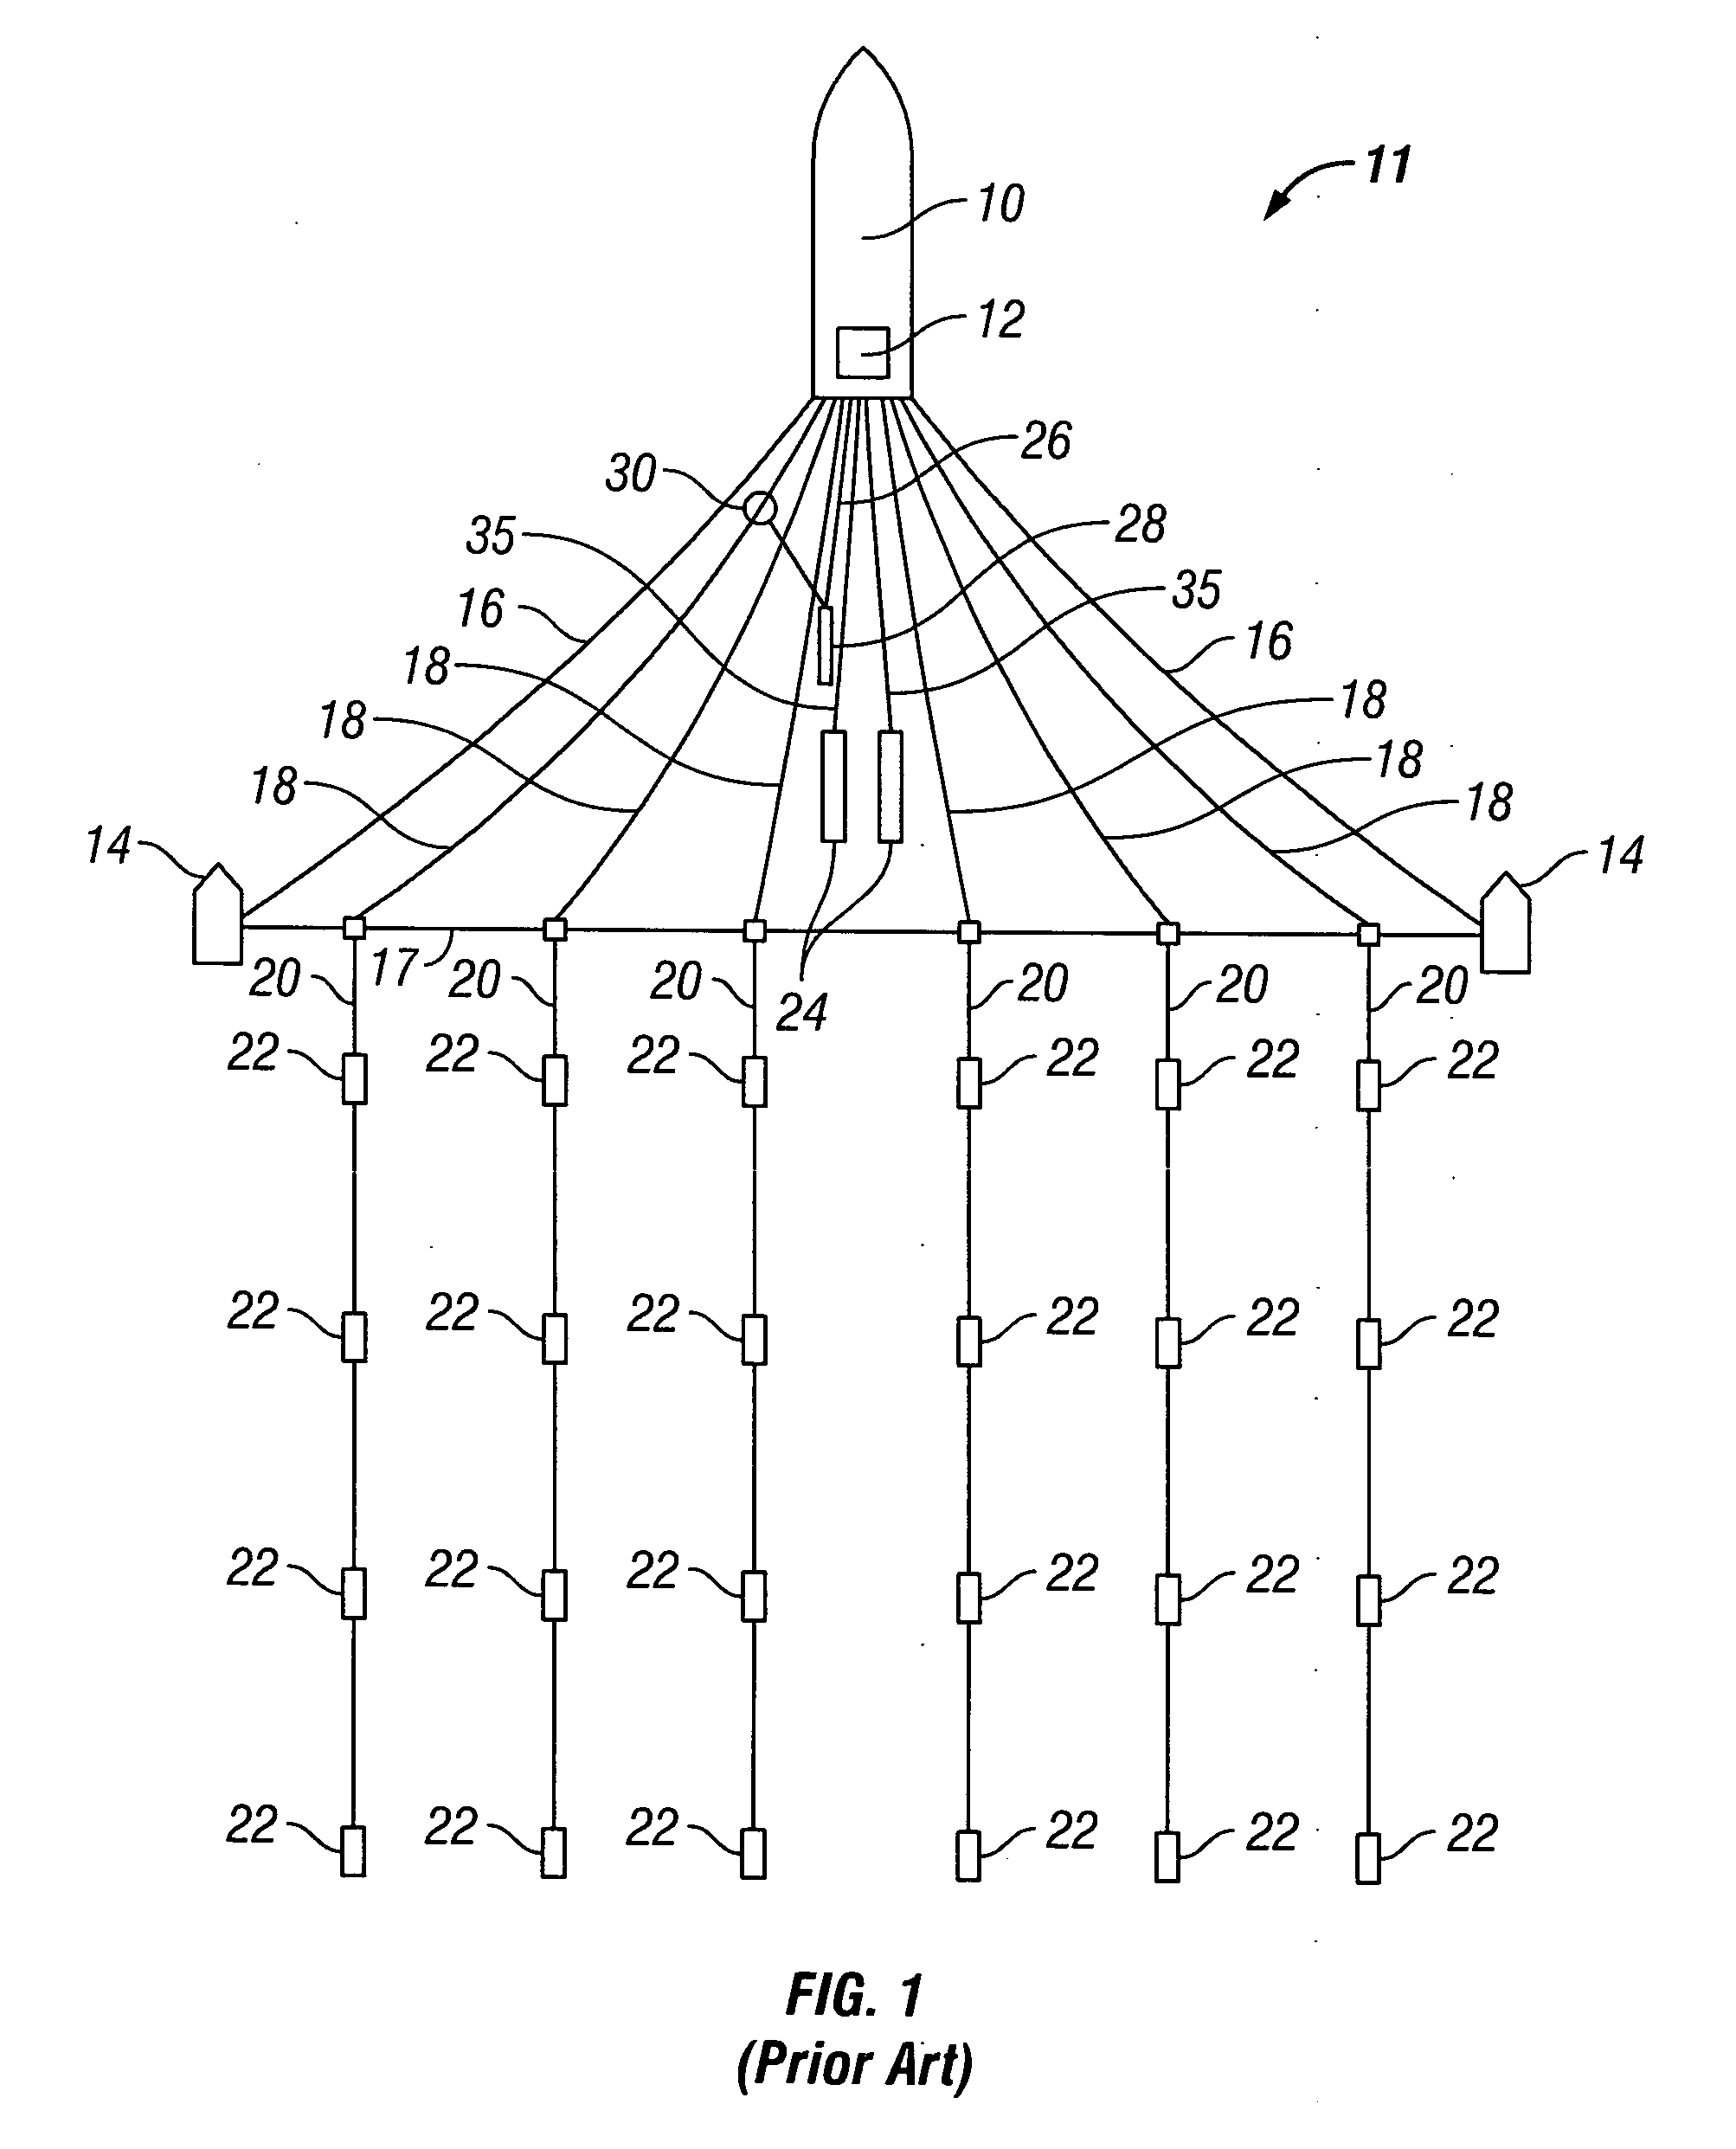 Method and system for passive acoustic monitoring in seismic survey operations